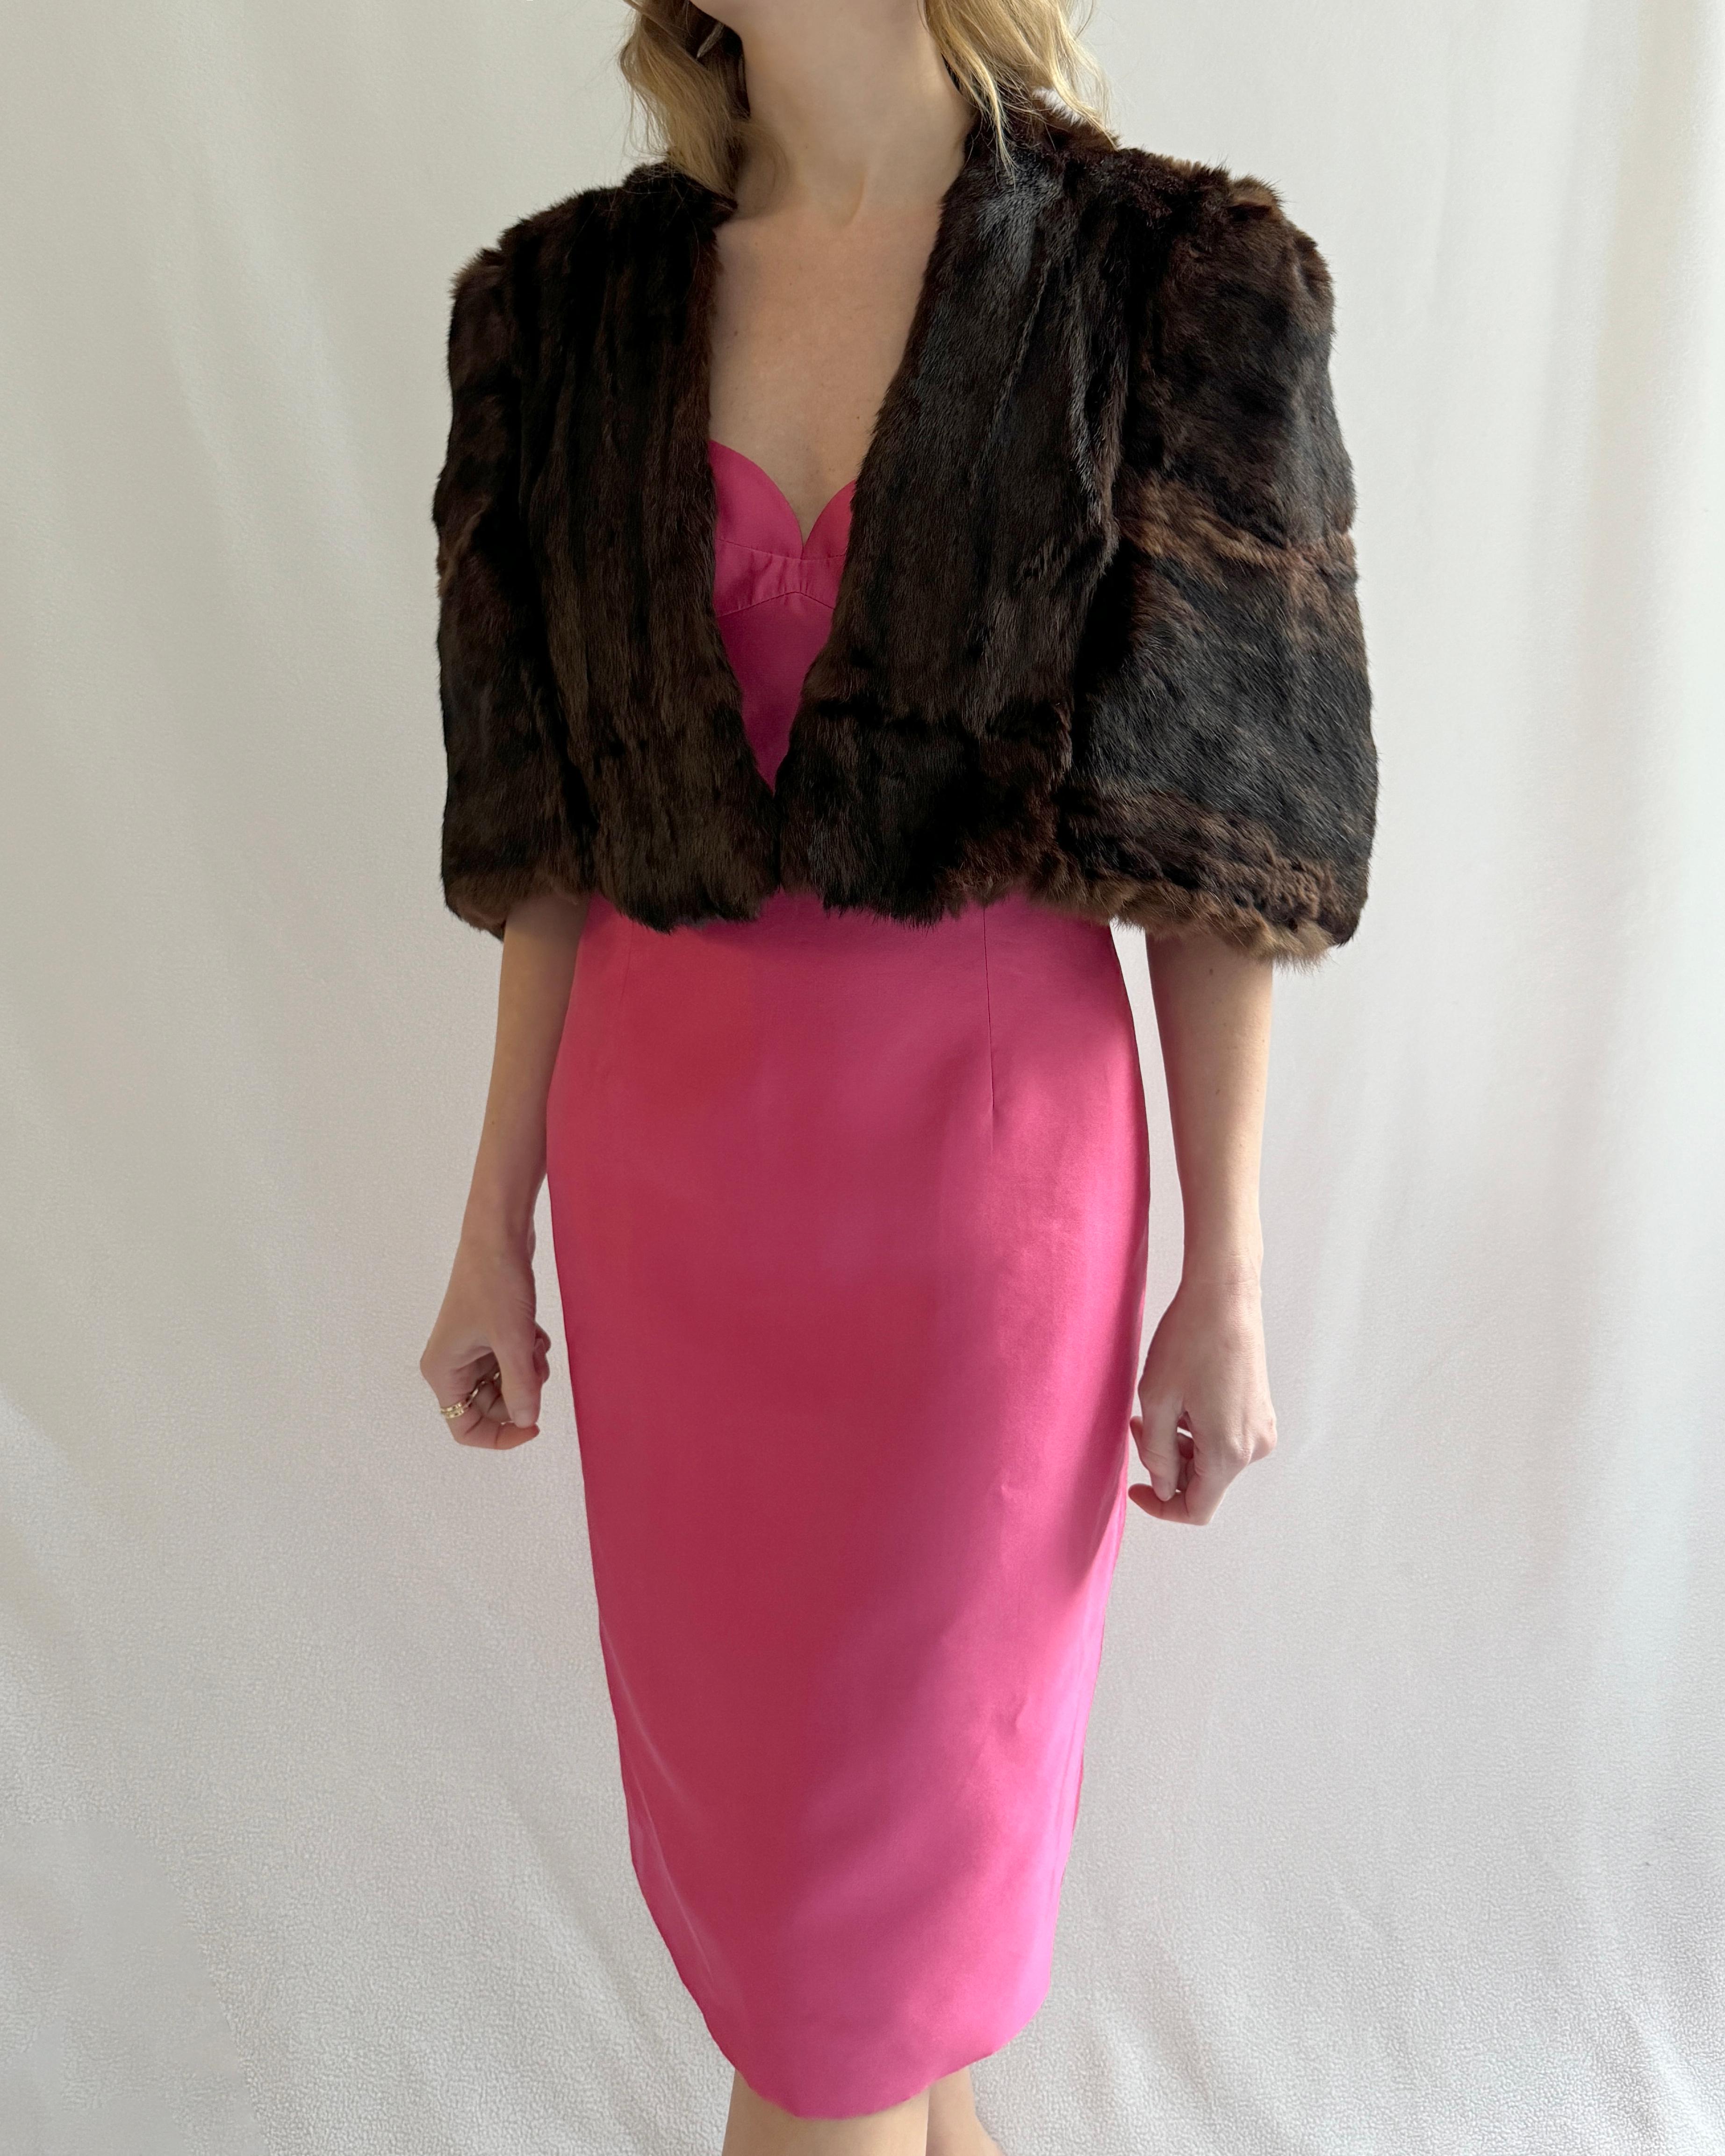 VINTAGE 1950s BROWN MINK FUR CAPE In Good Condition For Sale In New York, NY